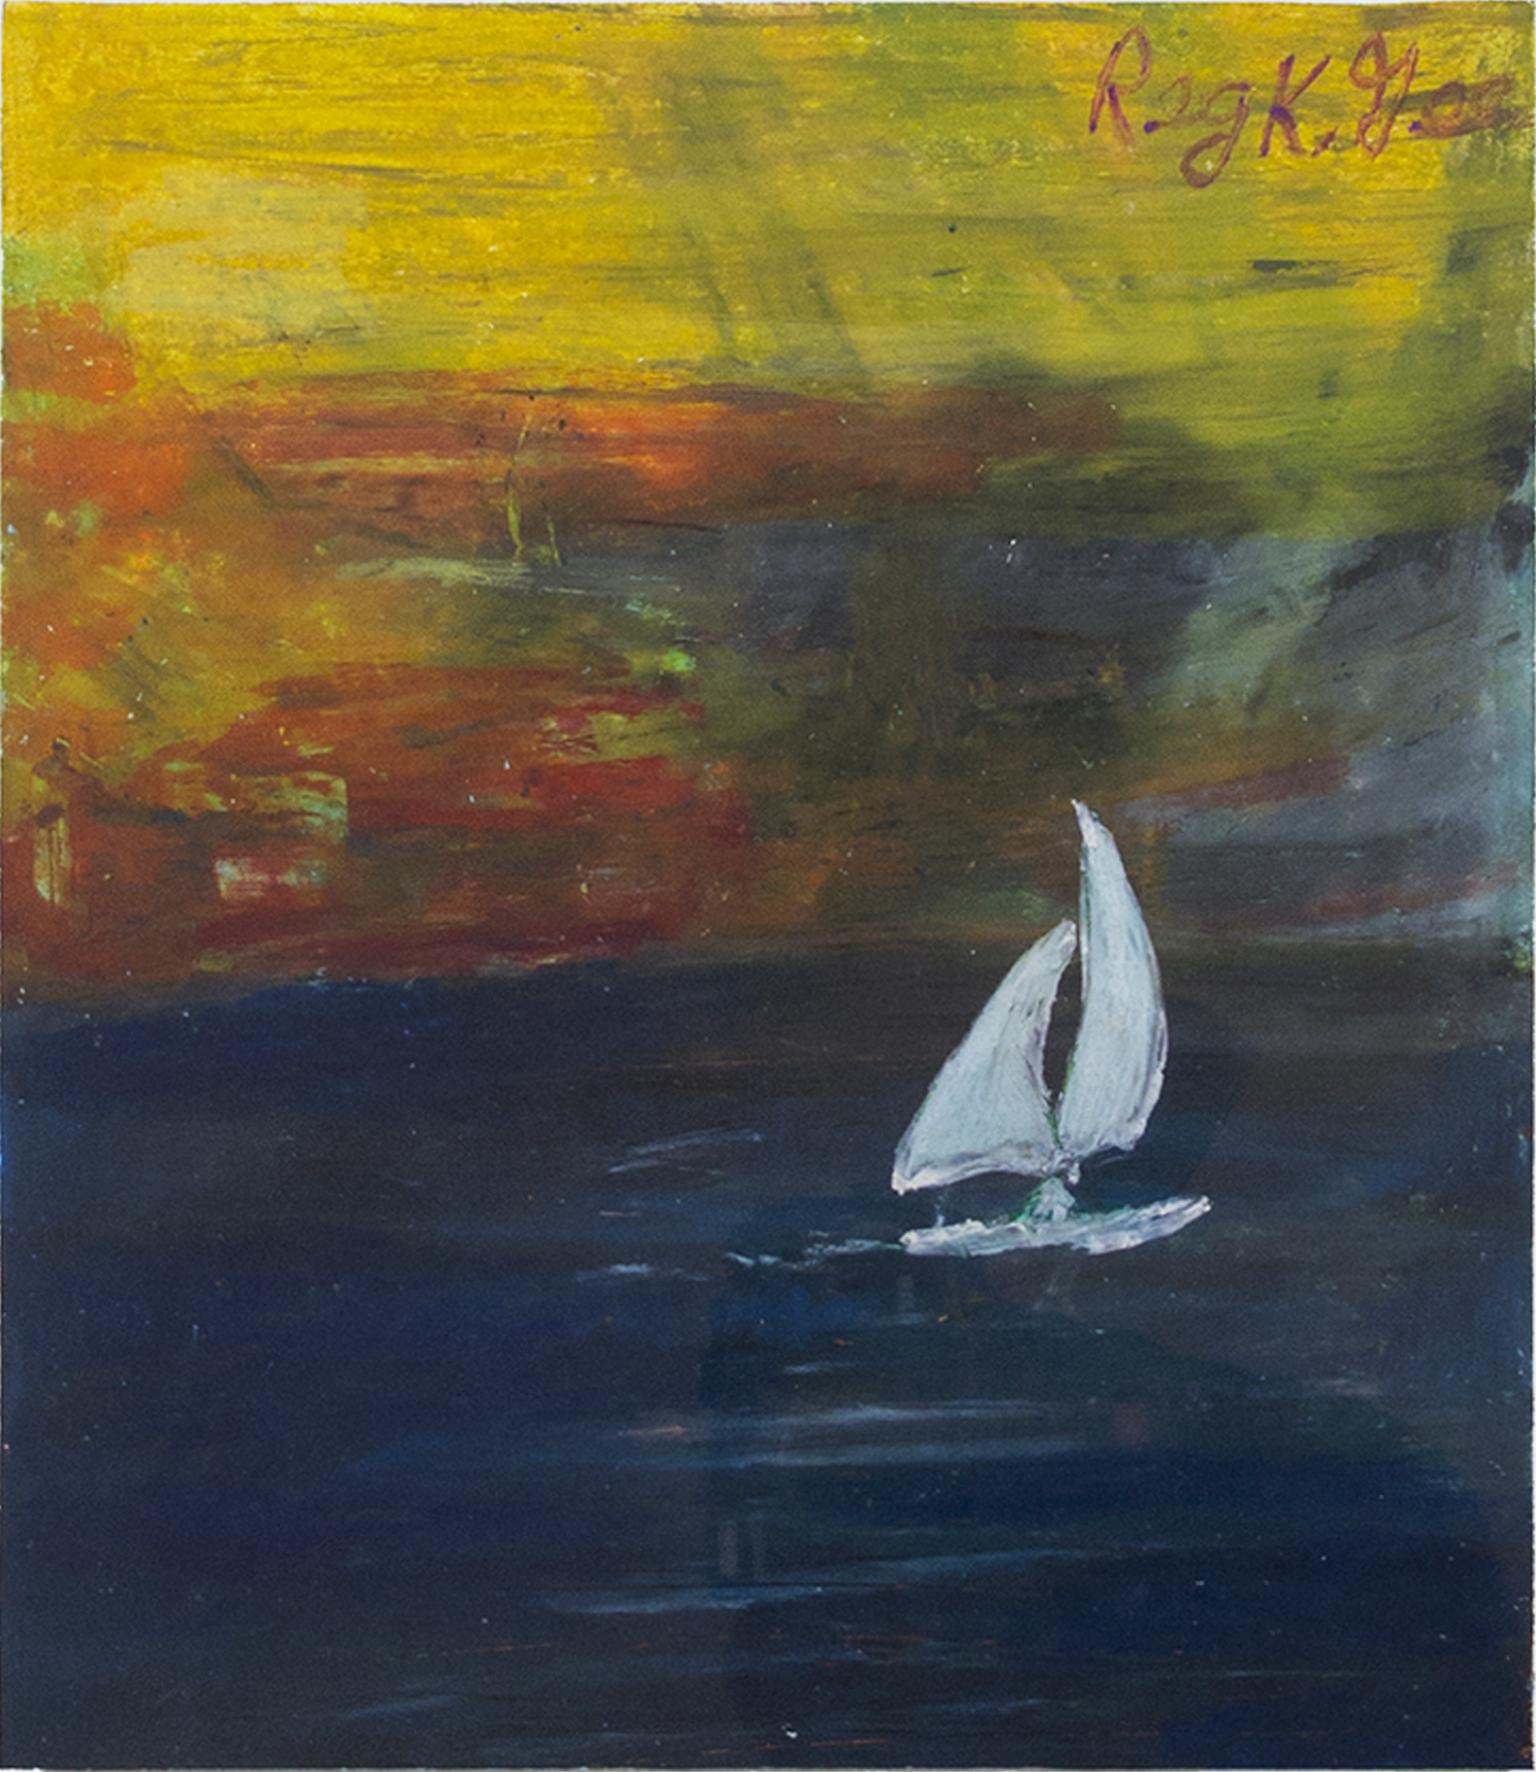 "Coasting Sailboat" is an original pastel drawing by Reginald K. Gee. The artist signed the piece lower right. It depicts a white sailboat on a dark sea with a colorful background. 

Artwork Size: 12" x 9"
Frame Size: 20 1/2" x 18 5/8"

Artist